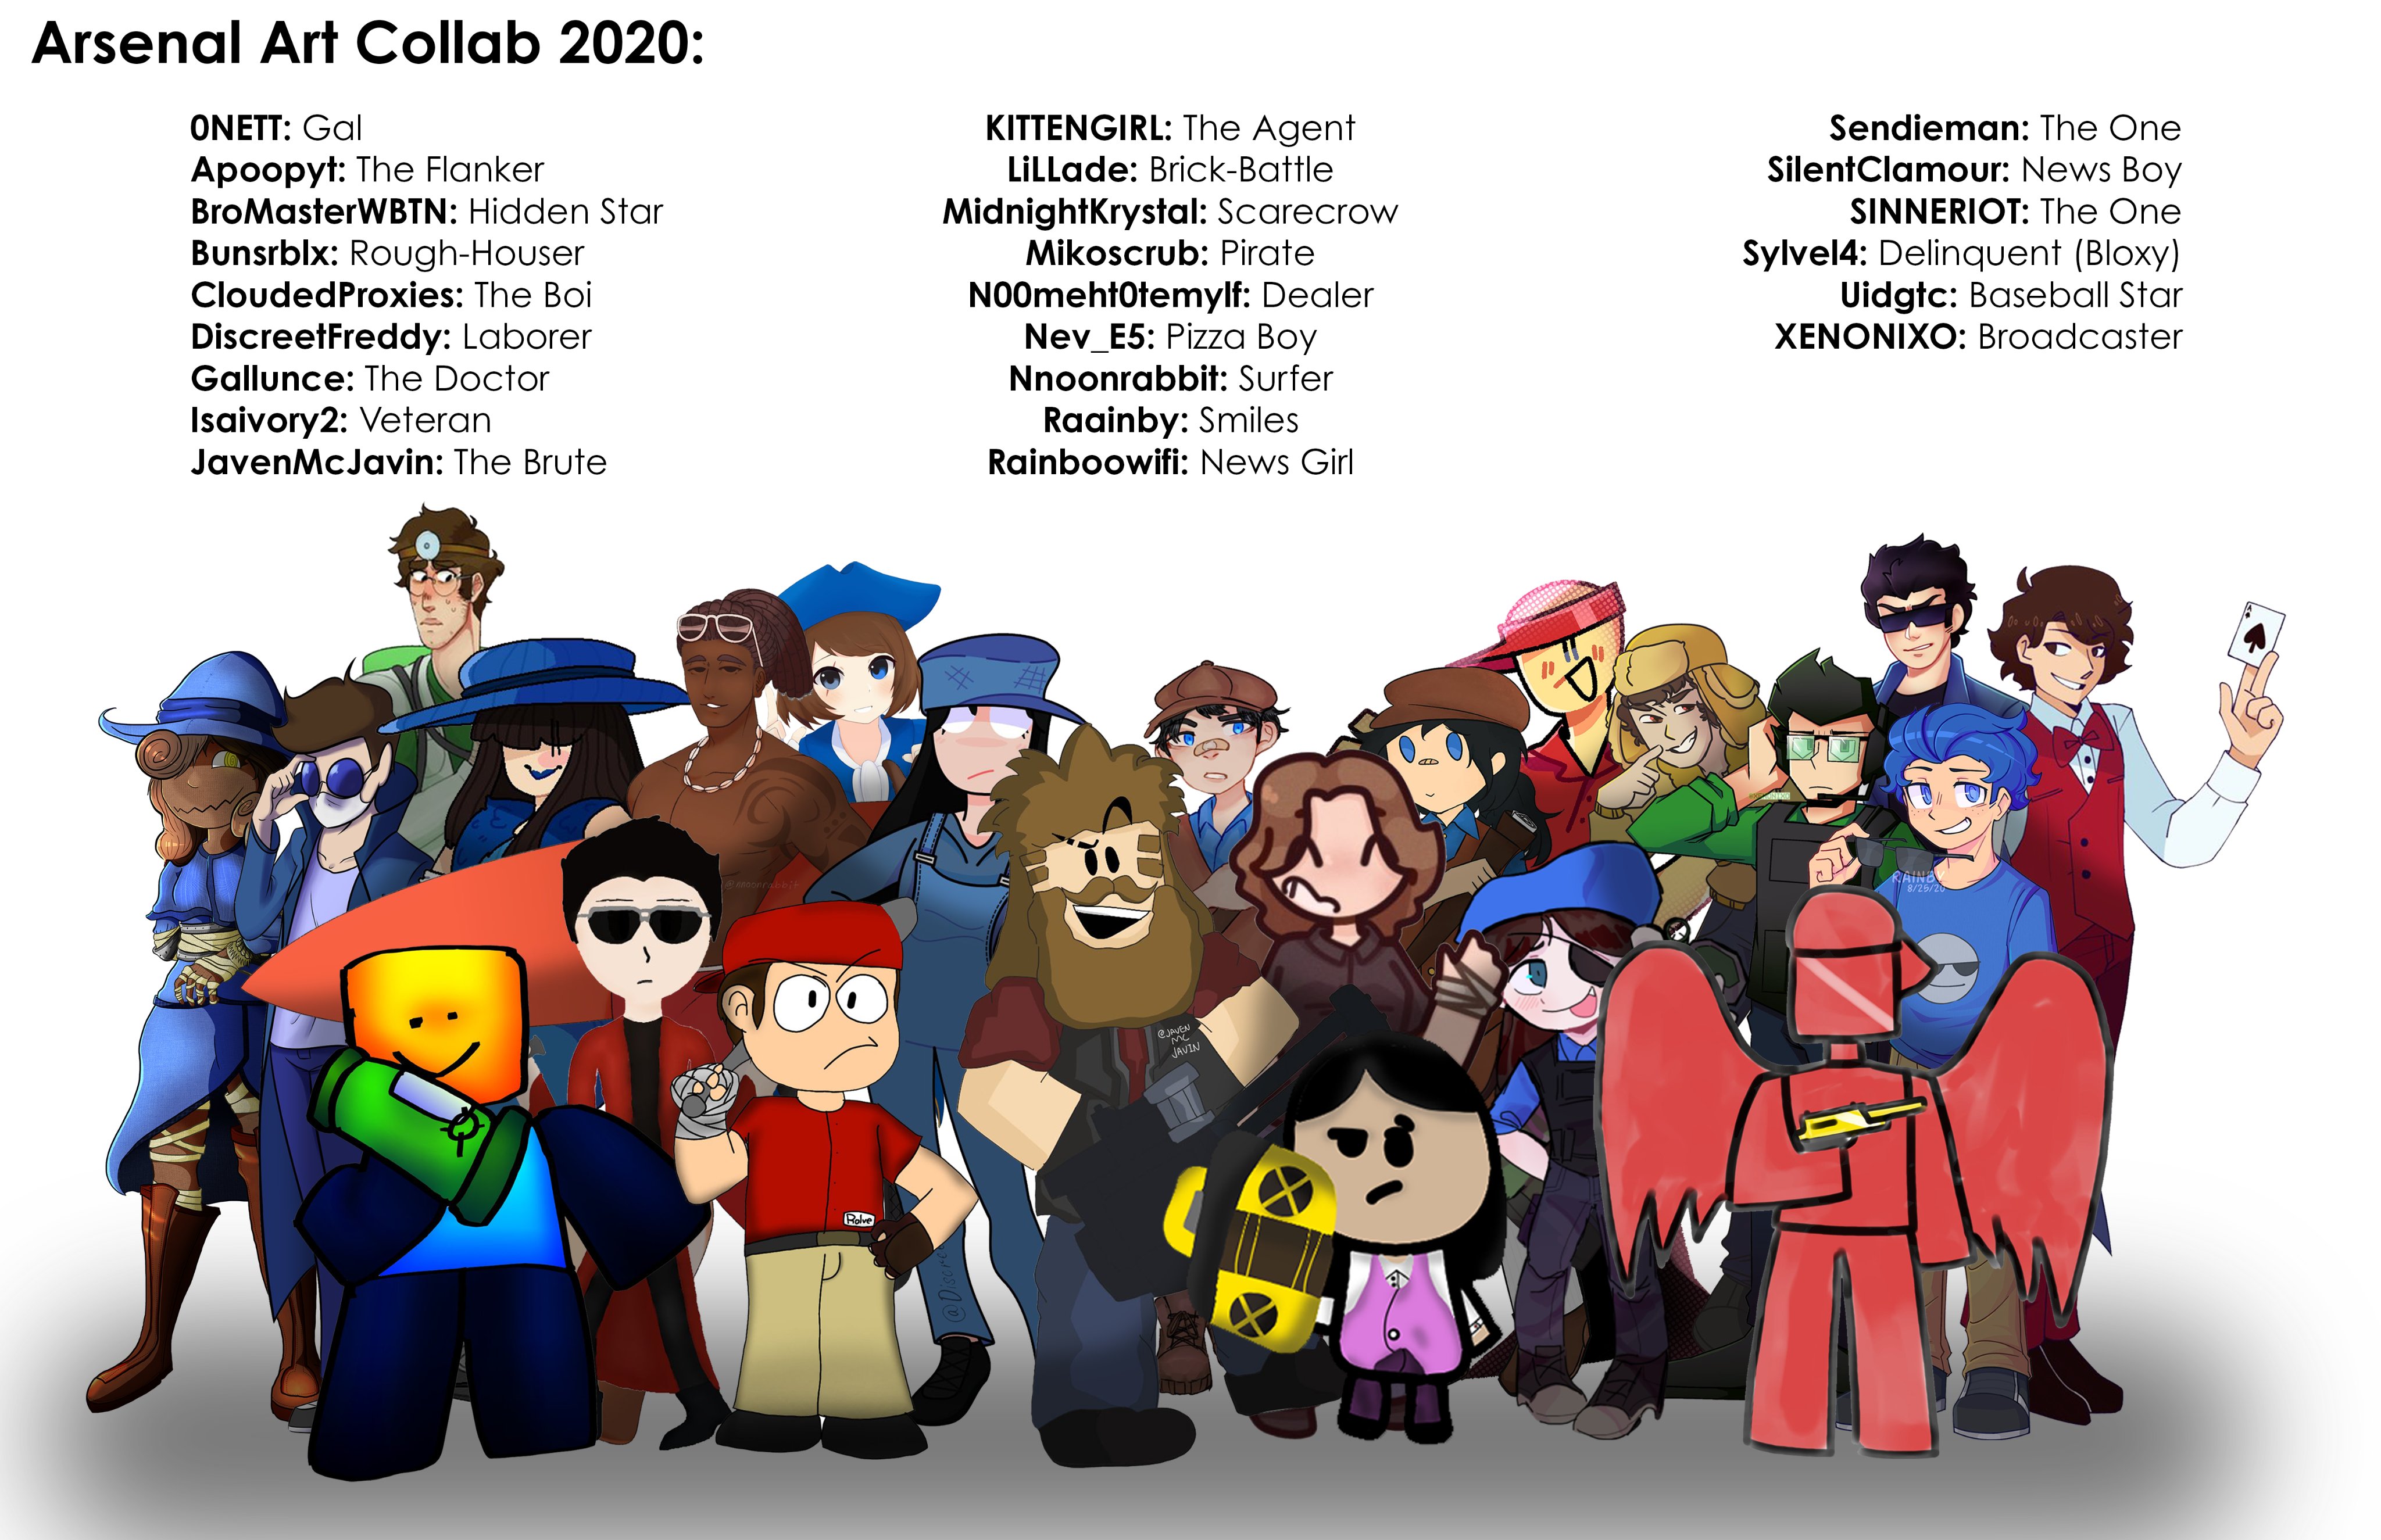 Midnightkrystal على تويتر Roblox Robloxart Robloxarsenal So Here It Is The Arsenal Art Collaboration Featuring 24 23 Not Including Myself Artists And 24 Characters Thank You Everyone Who Participated Check The Tweet - roblox arsenal hidden star